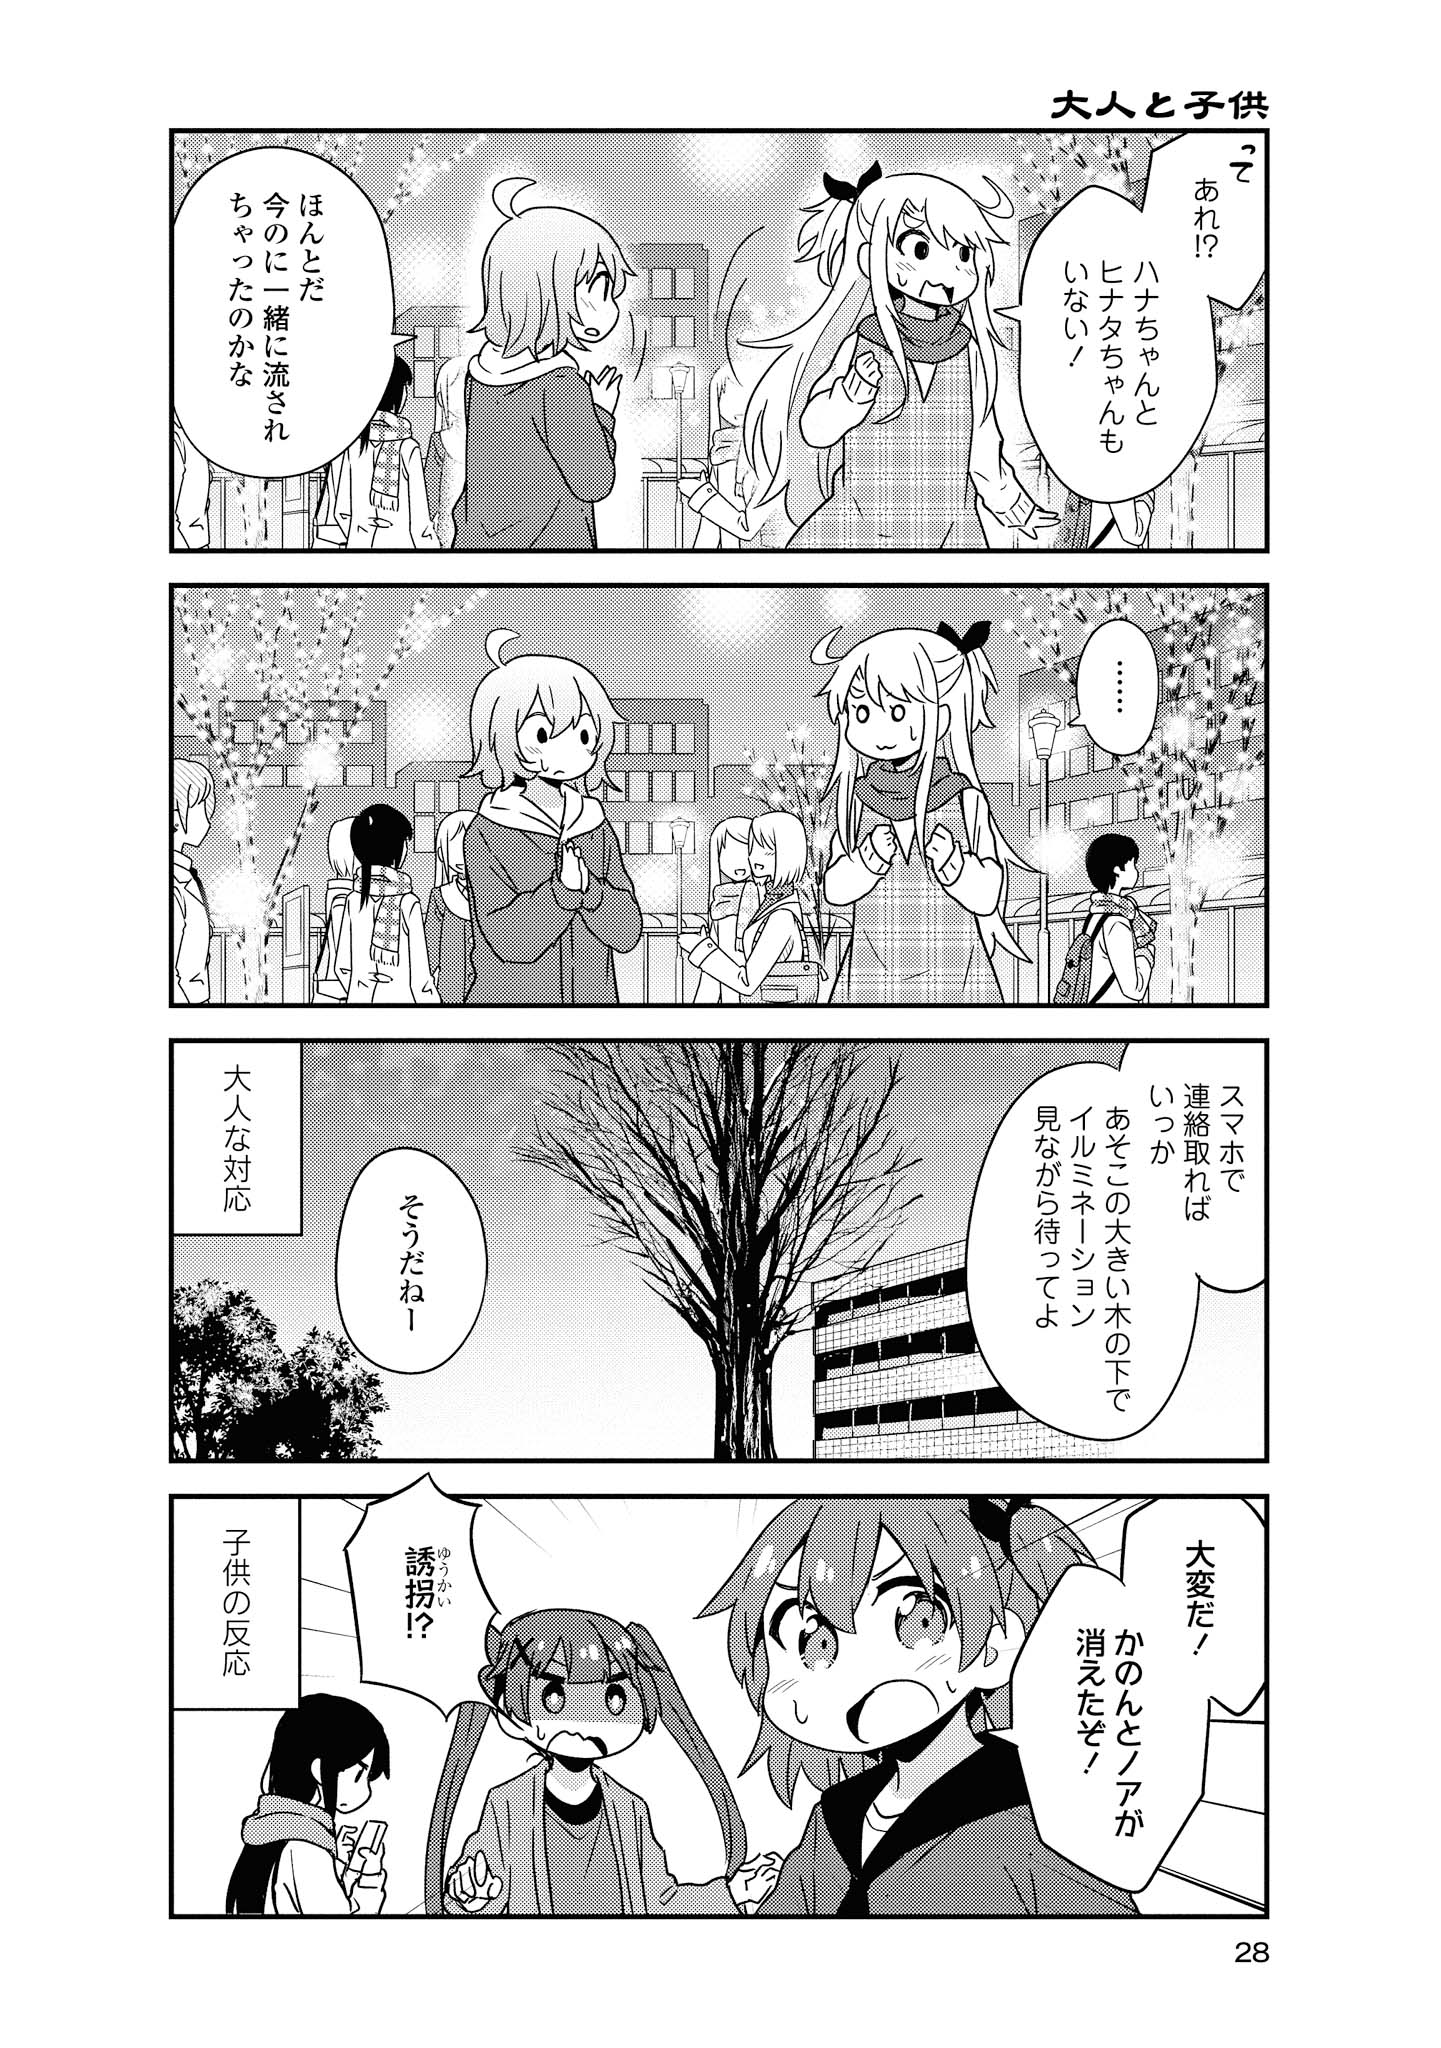 Wataten! An Angel Flew Down to Me 私に天使が舞い降りた！ 第45話 - Page 4